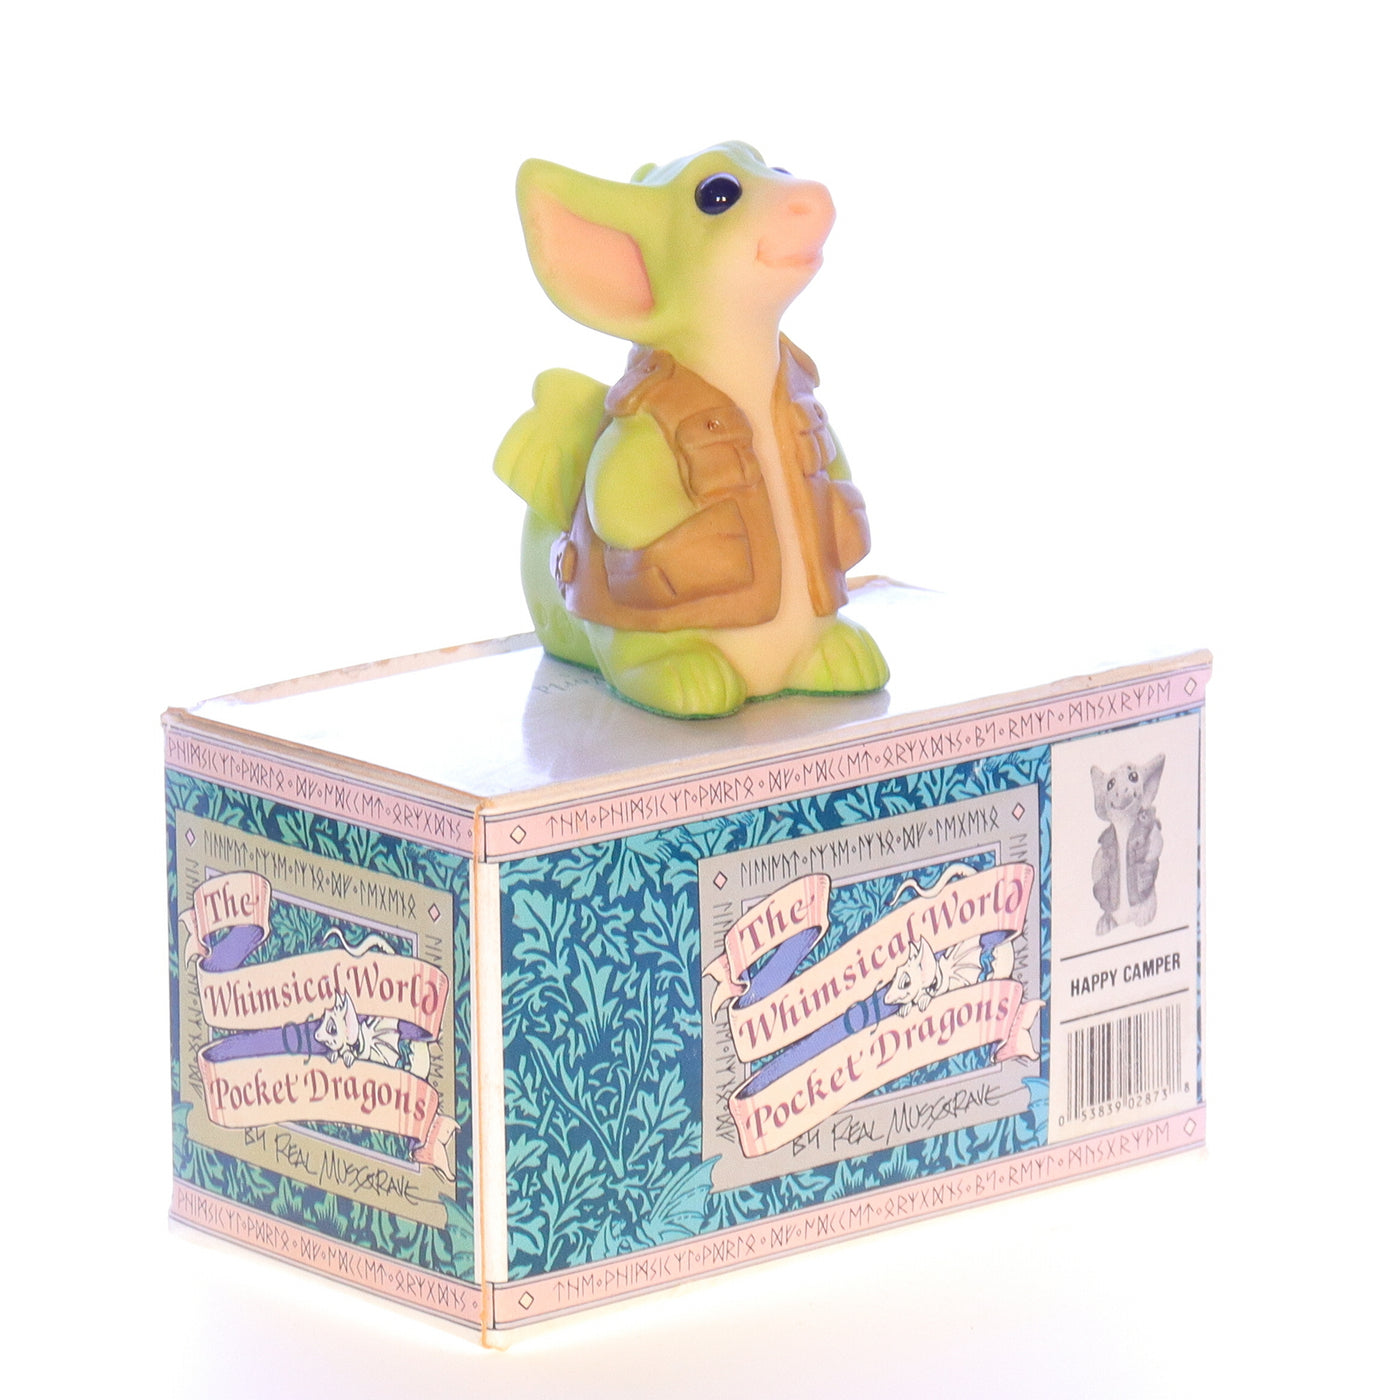 Whimsical_World_of_Pocket_Dragons_053839028738_Happy_Camper_Fantasy_Figurine_1997_Box Front Right View